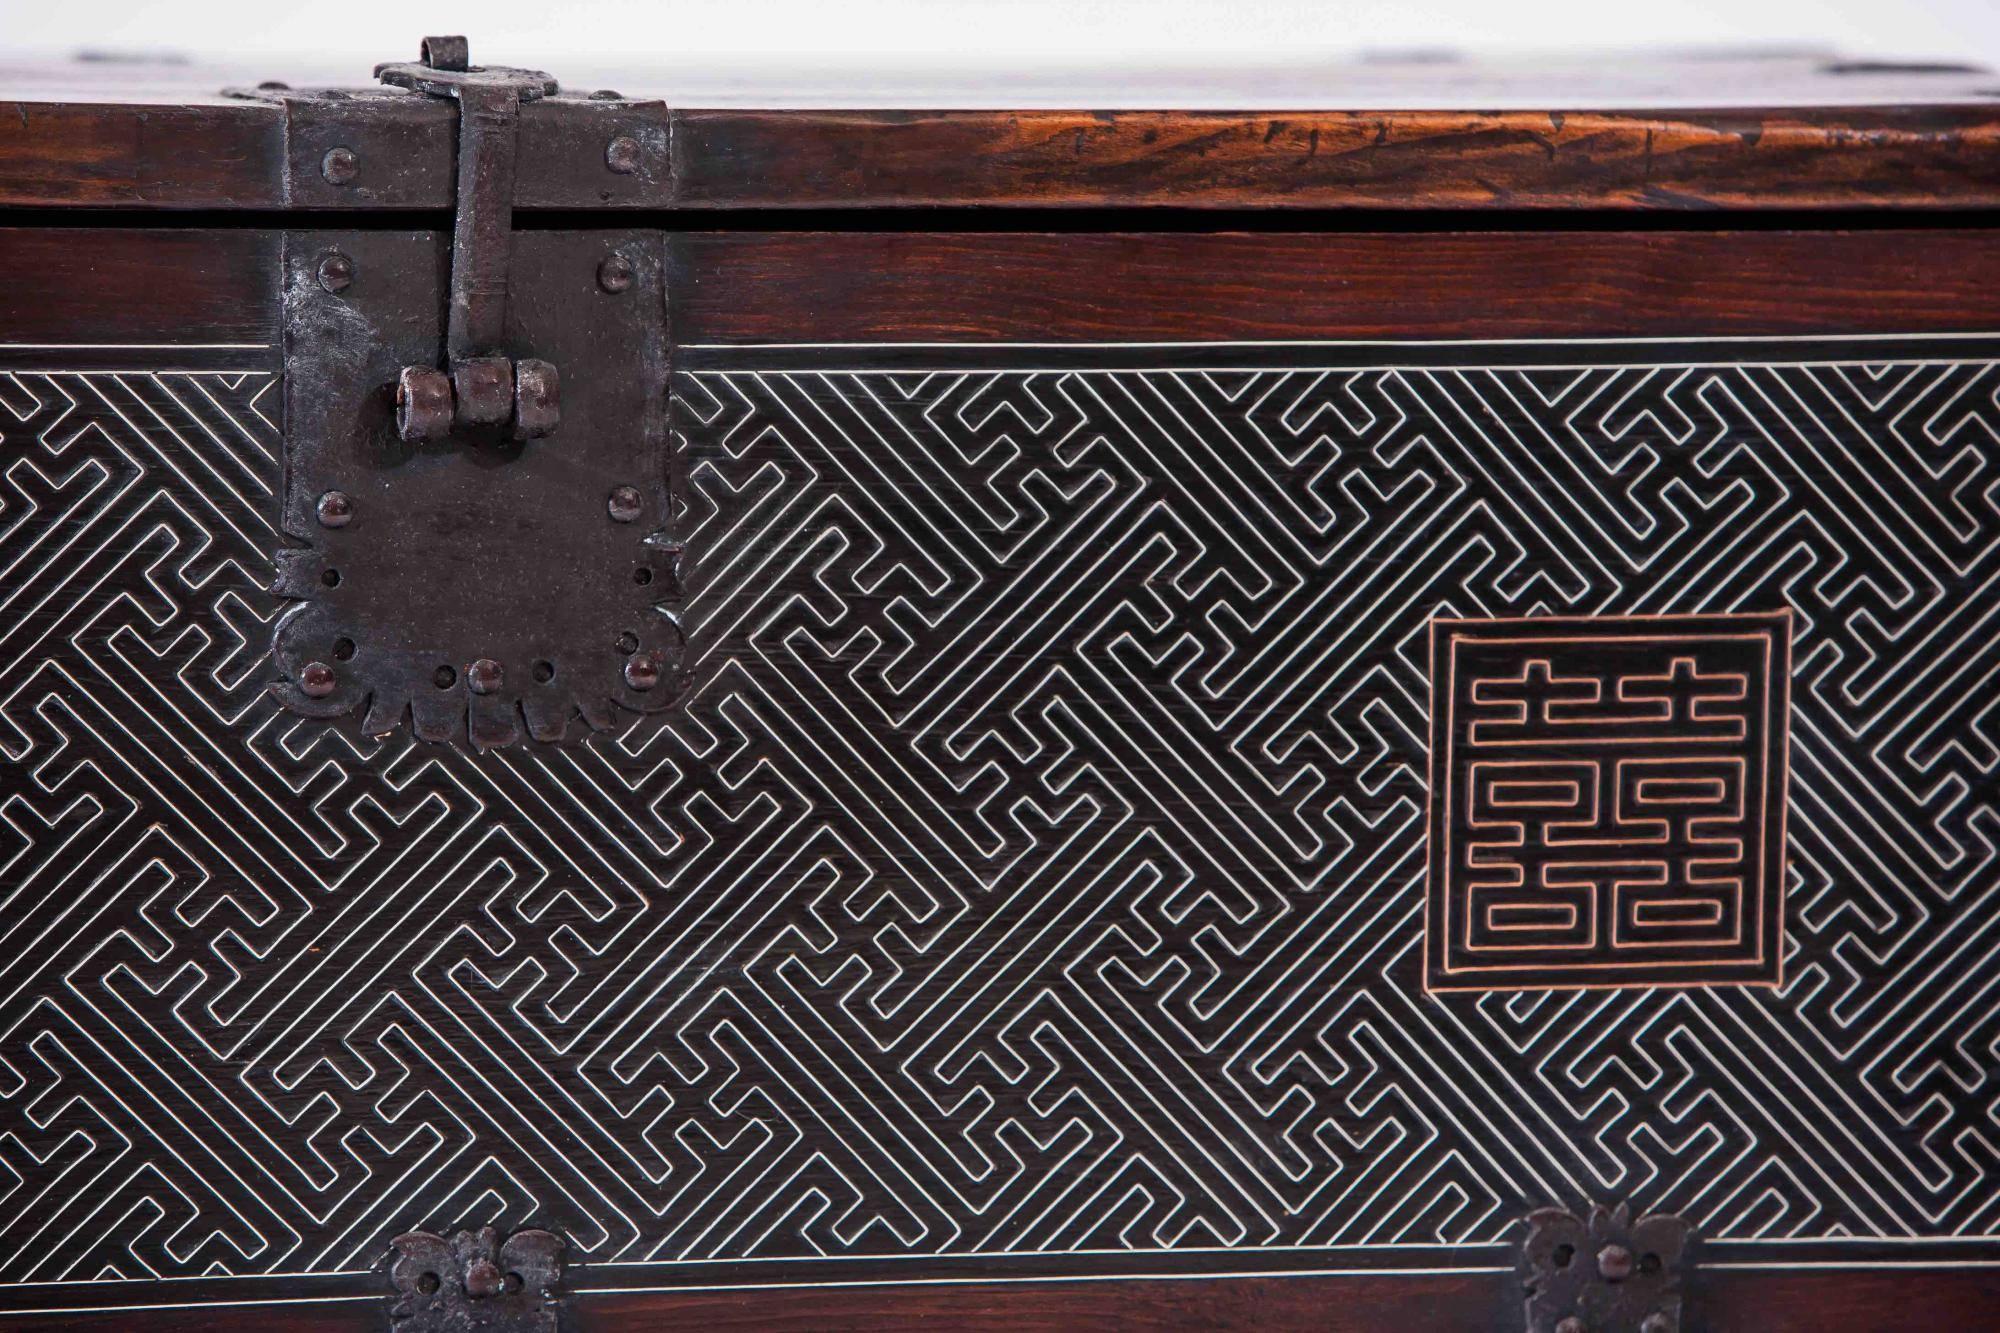 Korean Chest Yi dynasty limewood silver inlay brown storage cabinet, 19th century
This blanket chest or Bandaji is constructed of lime wood with delicate silver inlay throughout the front. The black rectangular lock plate secures the chest and thick